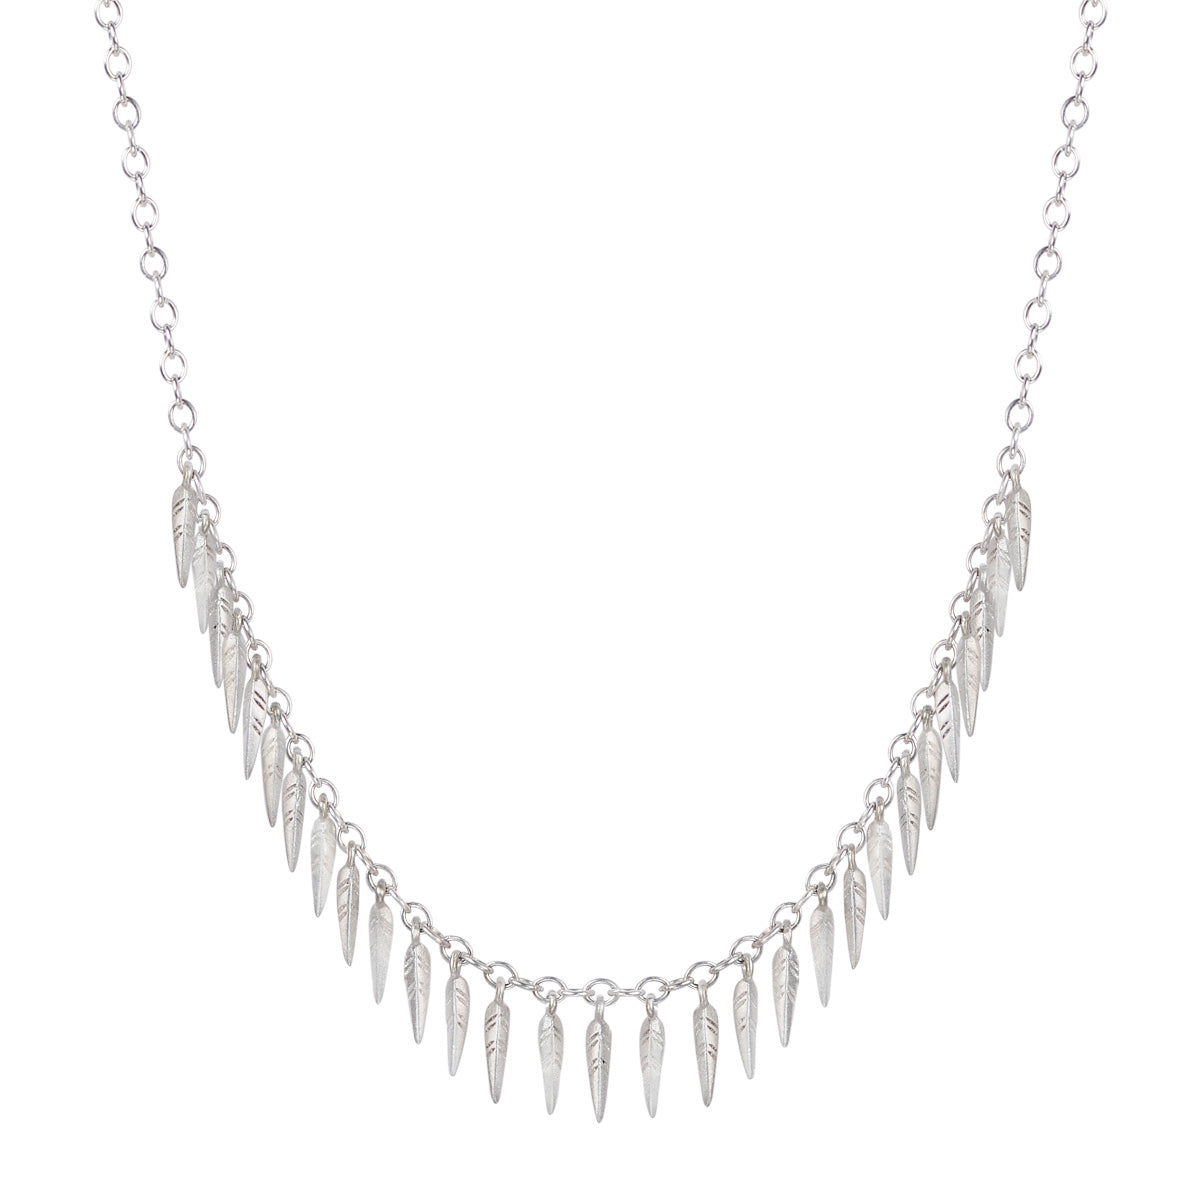 Sterling Silver Dream Catcher Fringe Necklace - Me&Ro